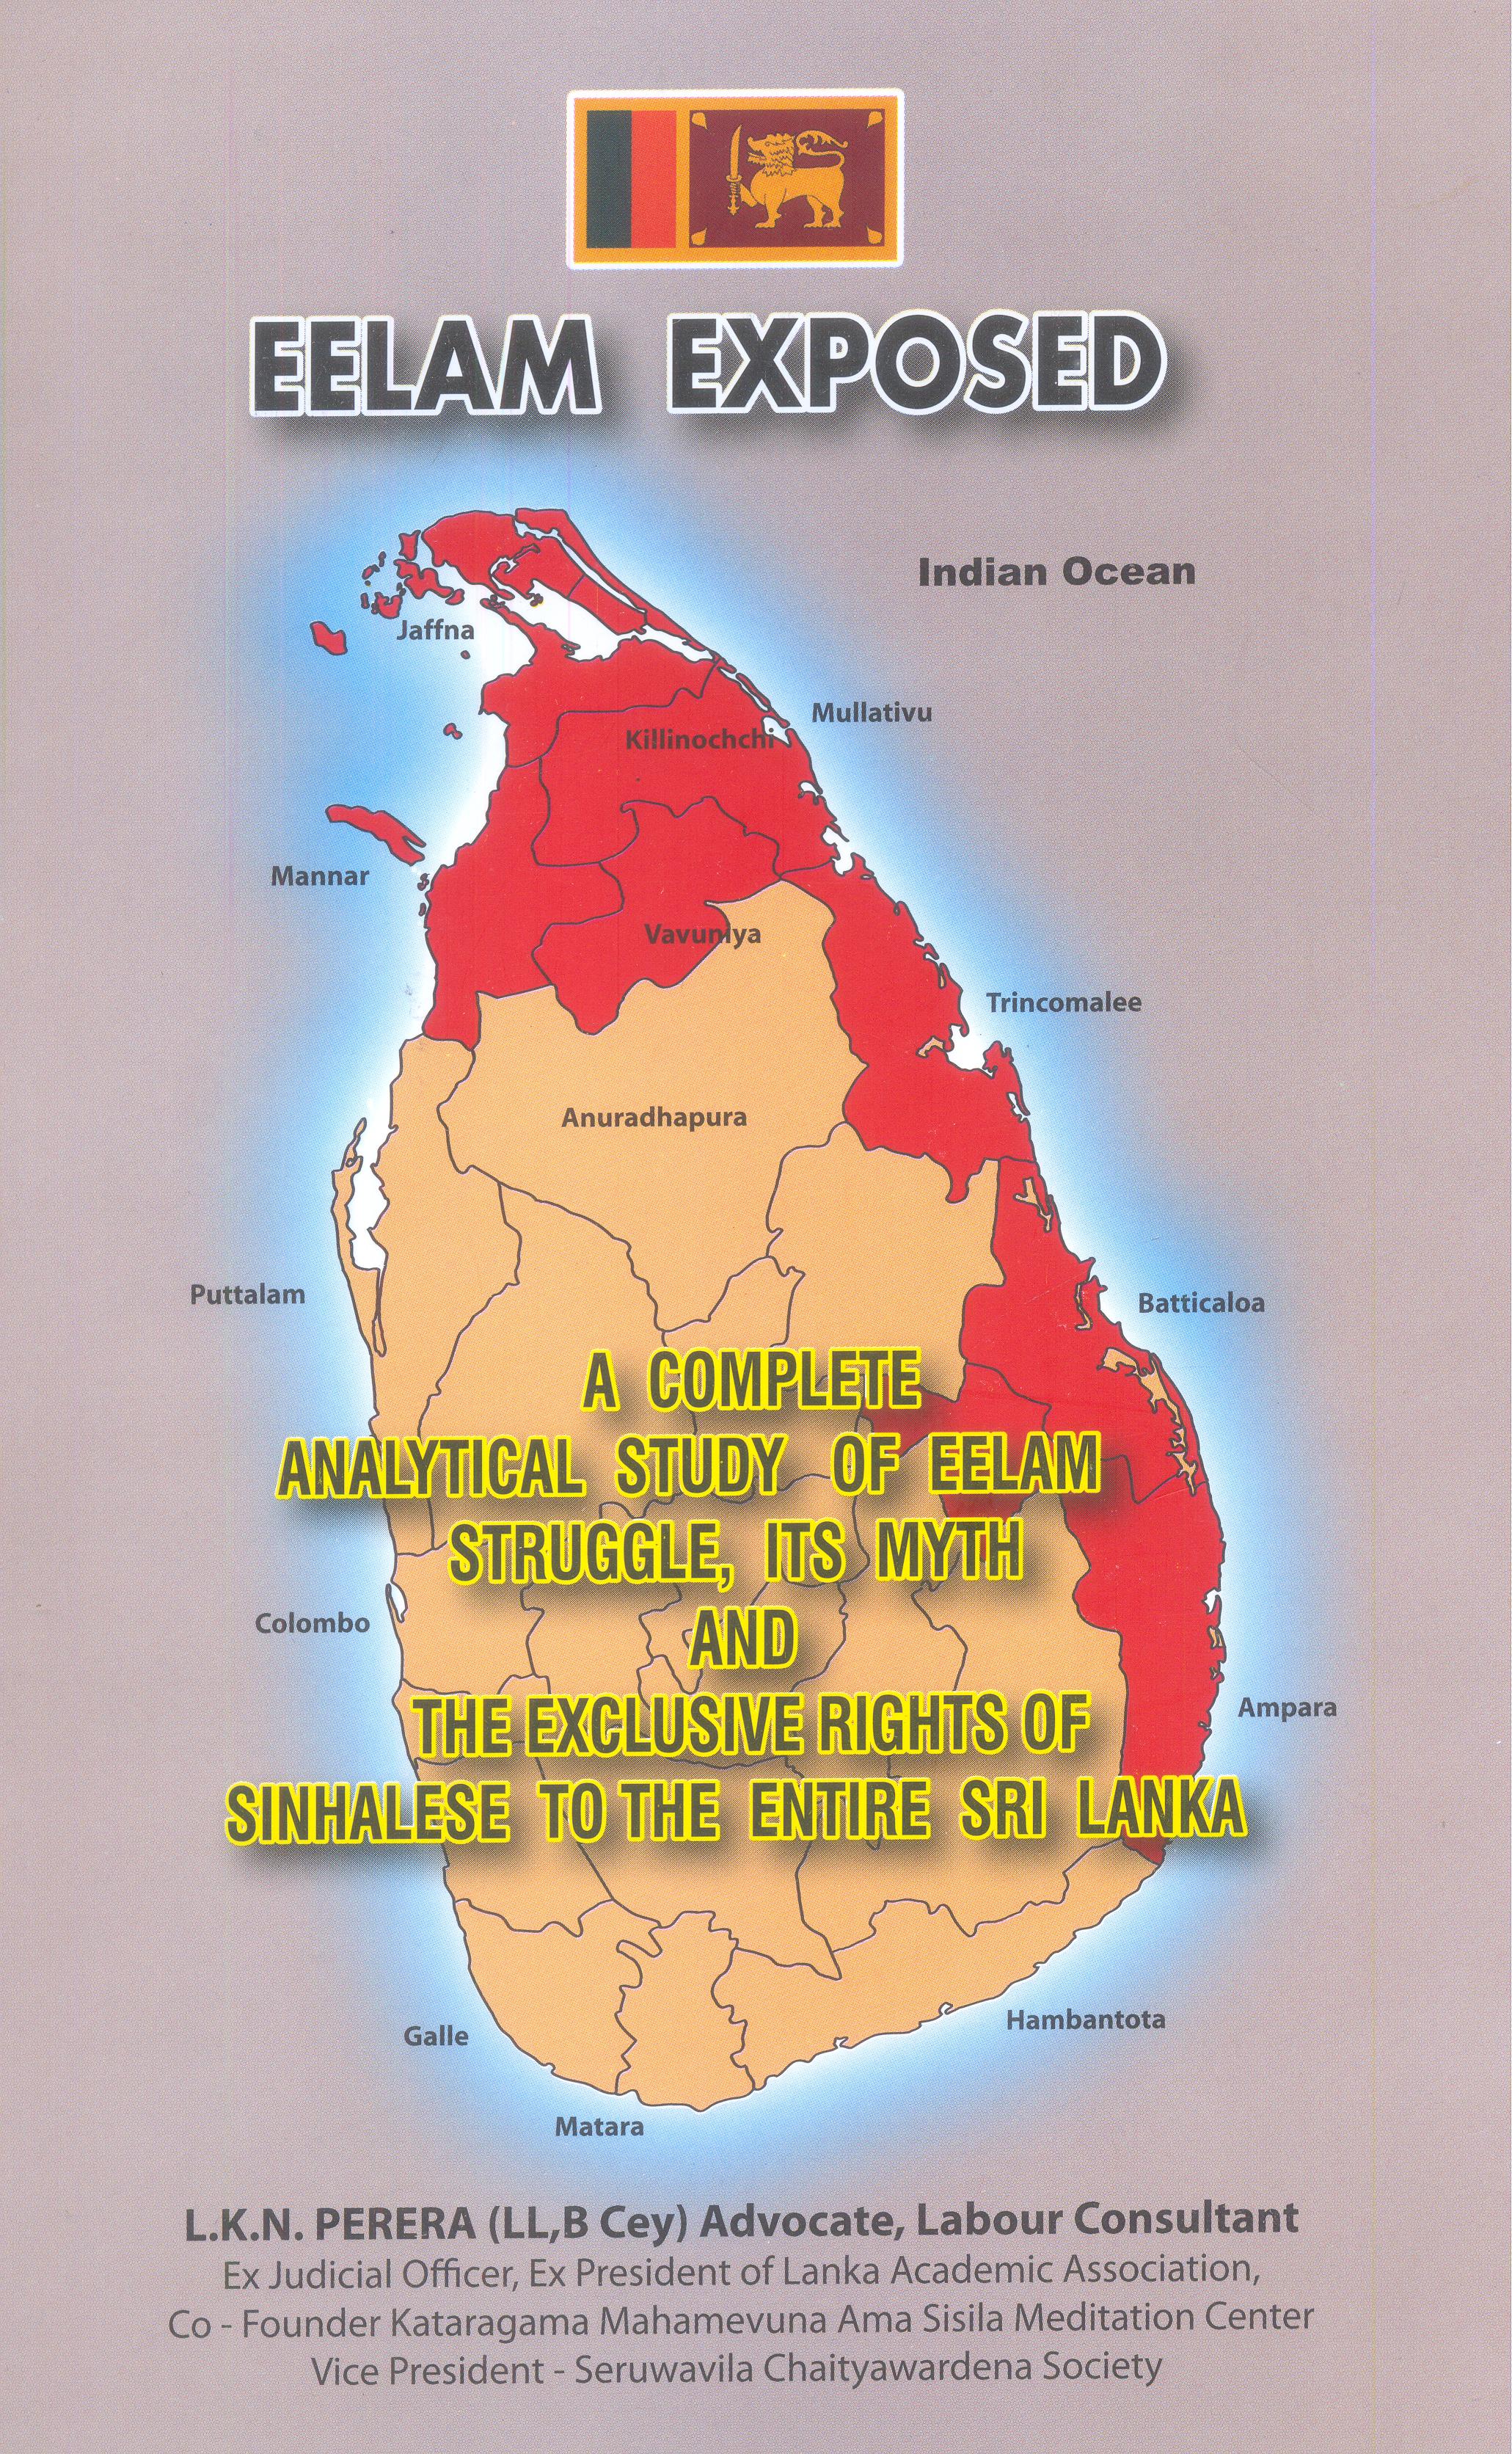 Eelam Exposed - A Complete Analytical Study Of Eelam Struggle, Its Myth And The Exclusive Rights (P/B)